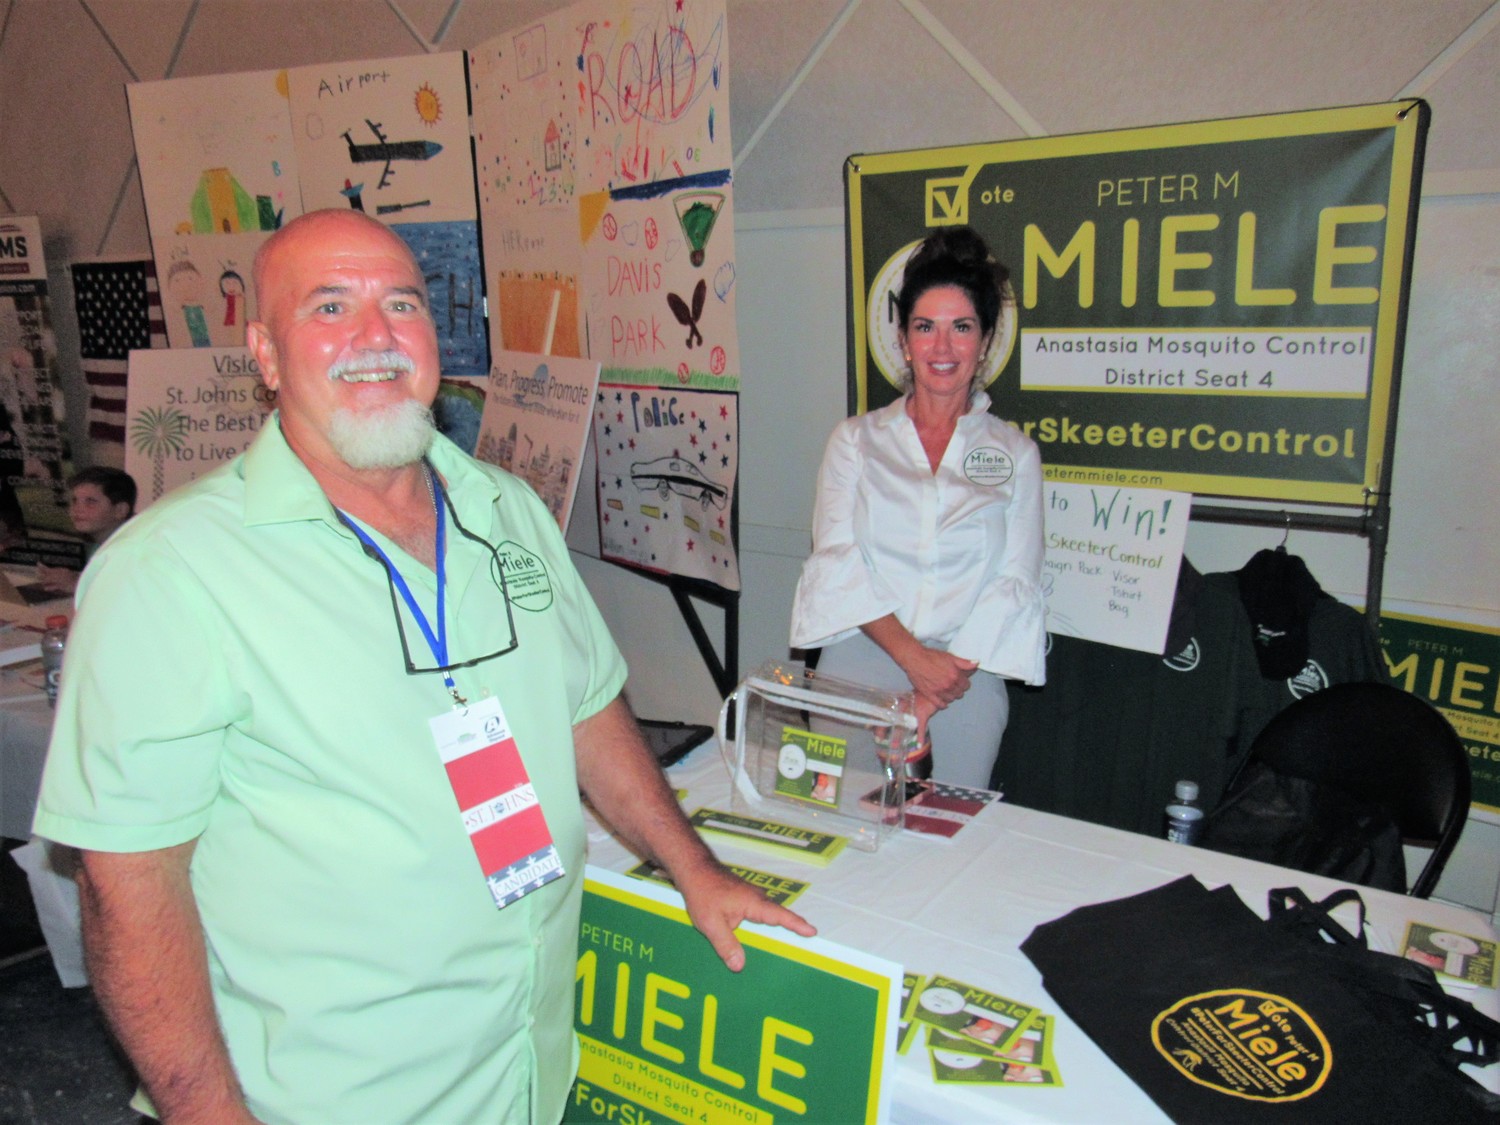 Peter Miele, who is running for the Anastasia Mosquito Control District 4 seat, poses by his table with supporter Cathlene Miner.